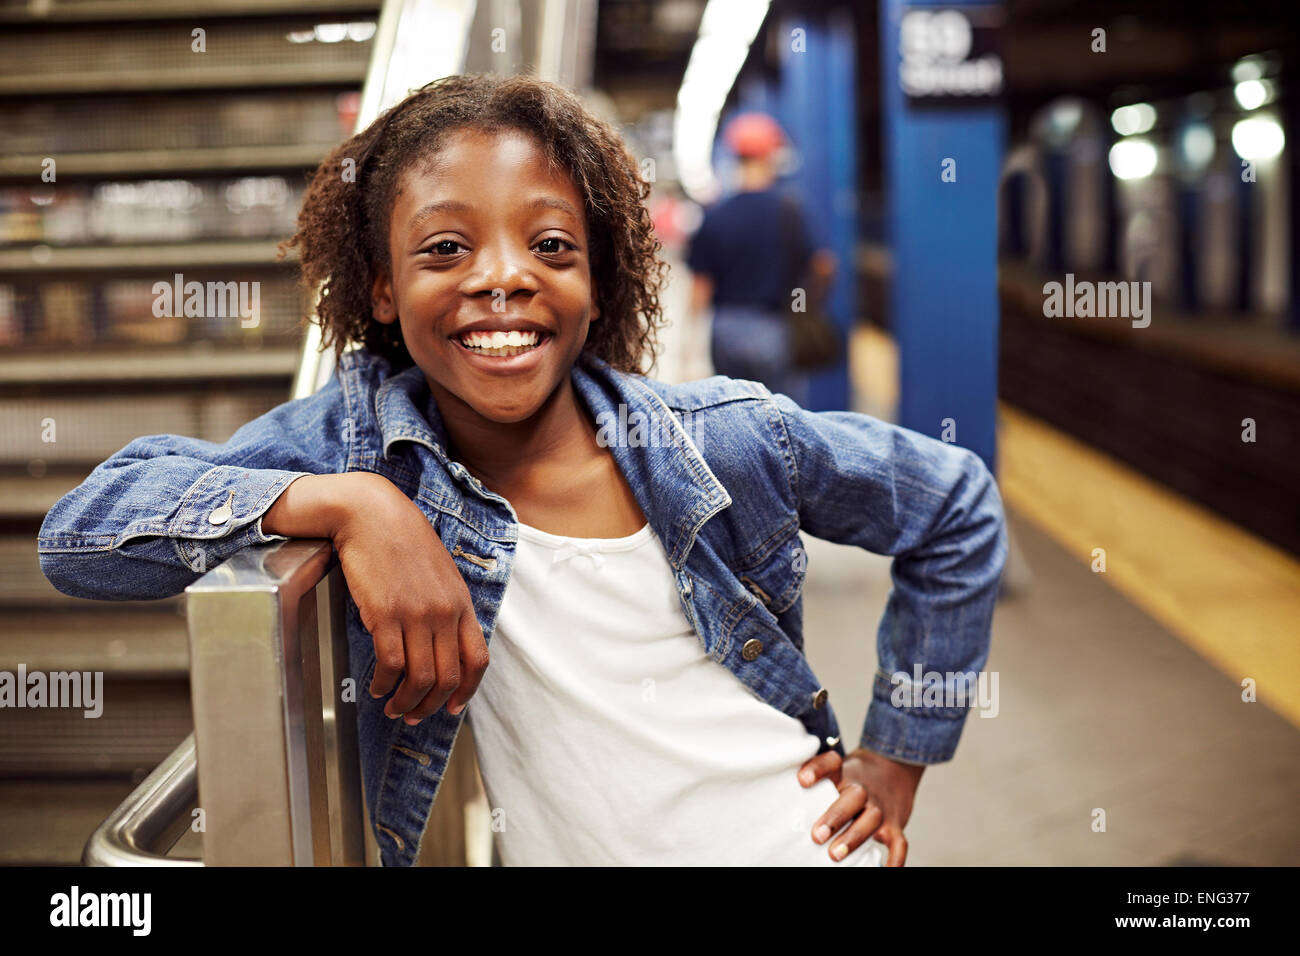 Smiling girl leaning on subway staircase Stock Photo